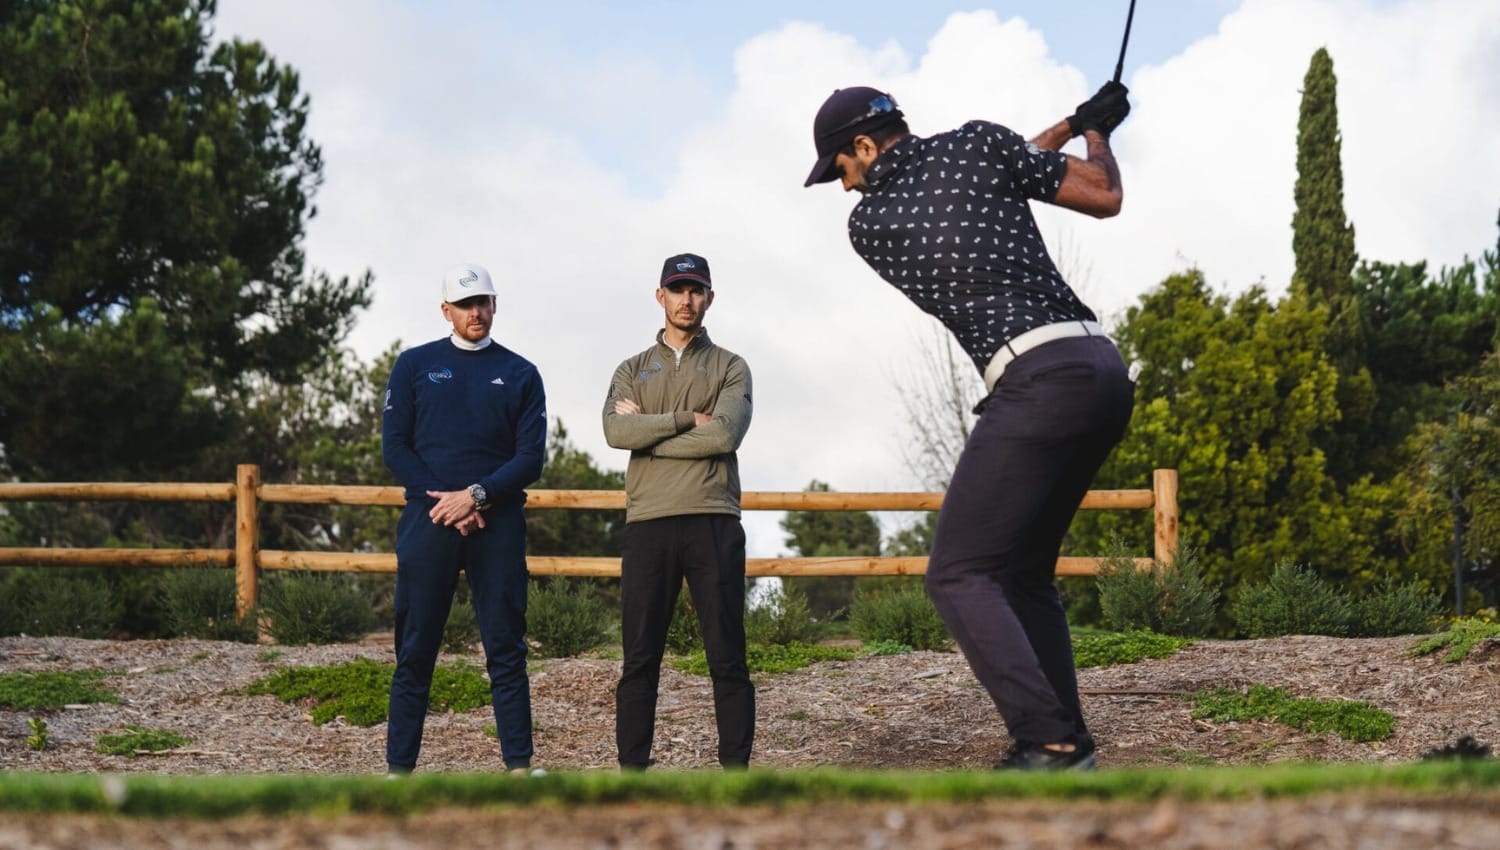 PGA coaches Piers and Andy watch Aaron Rai hit driver during golf lesson.